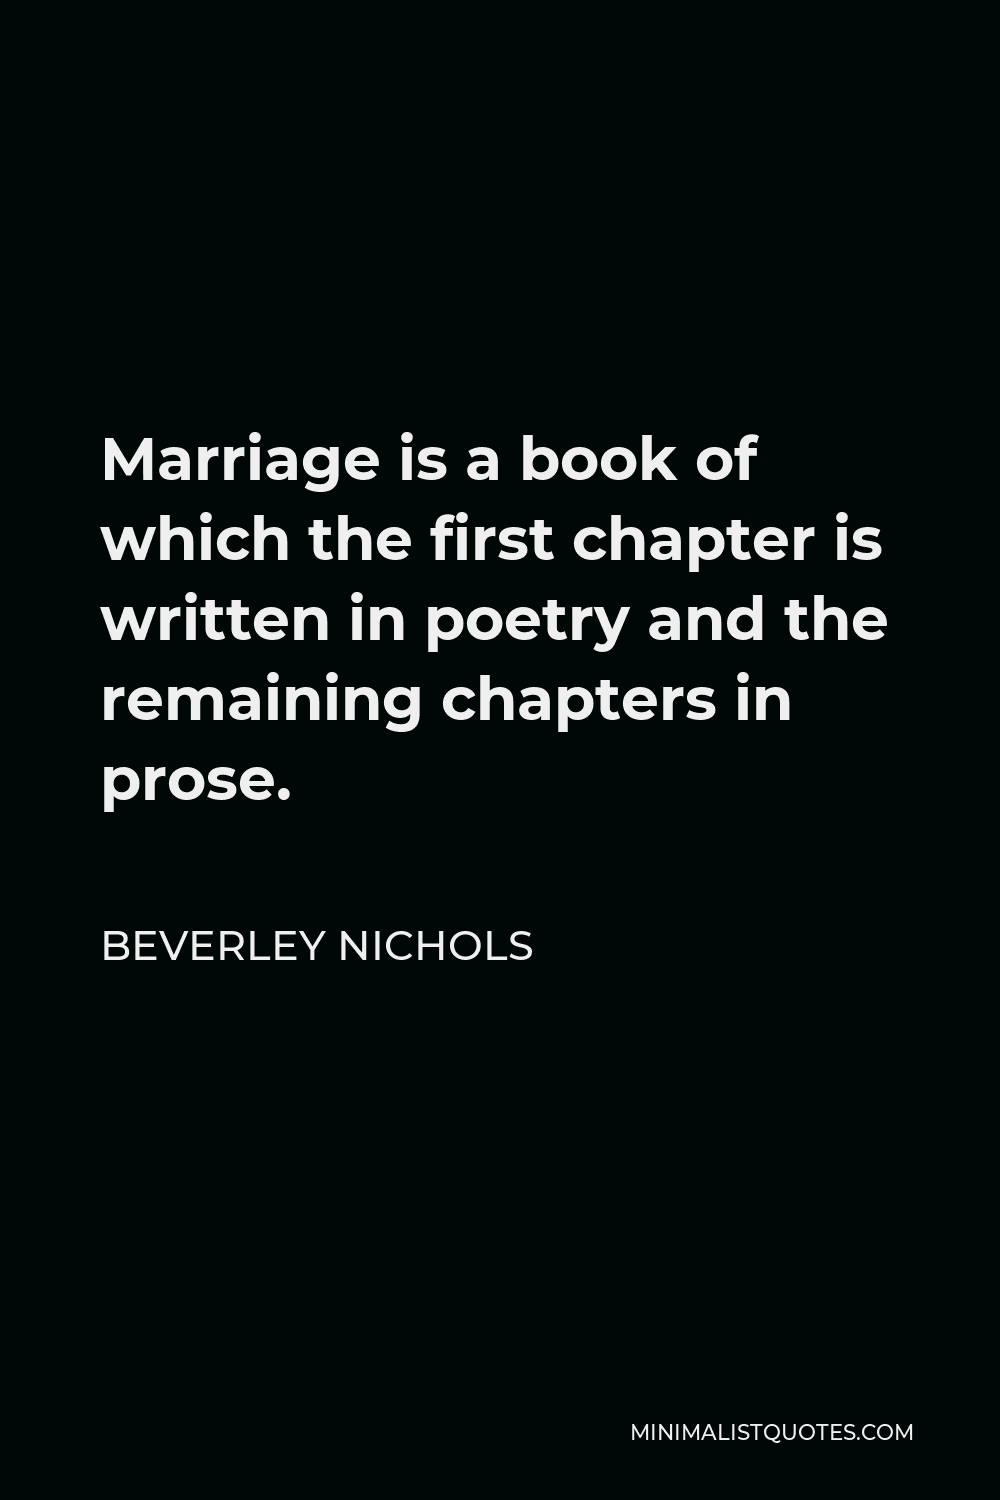 Beverley Nichols Quote - Marriage is a book of which the first chapter is written in poetry and the remaining chapters in prose.